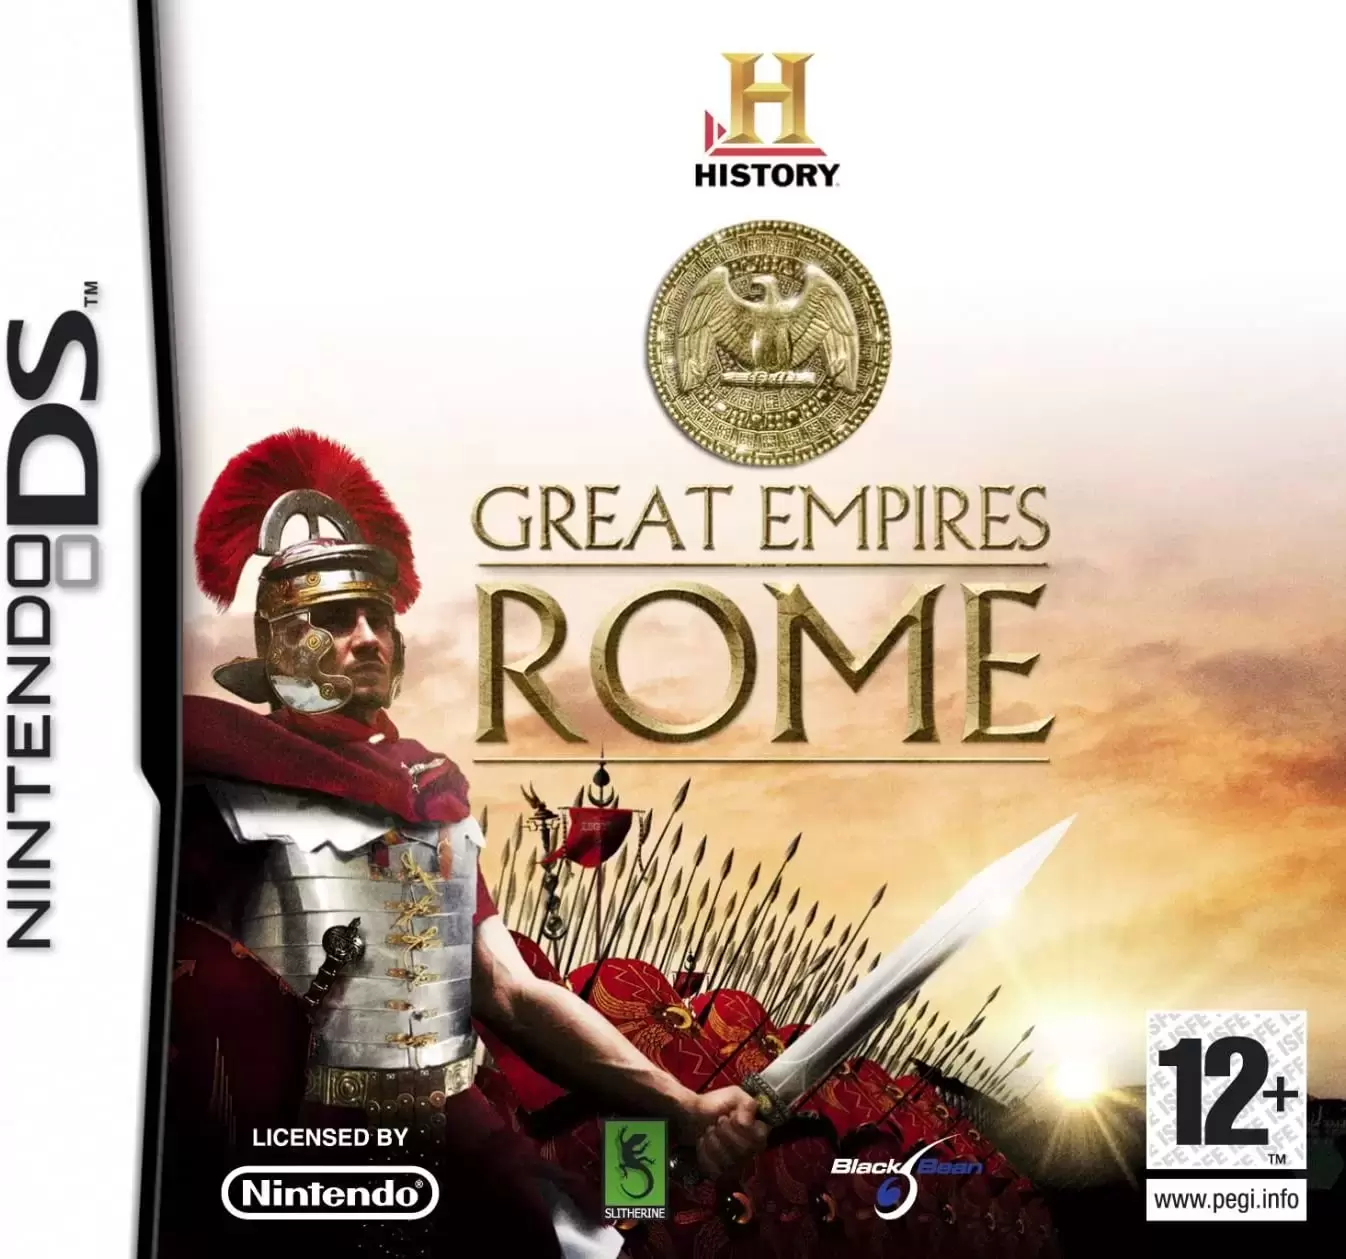 Jeux Nintendo DS - History, Great Empires Rome